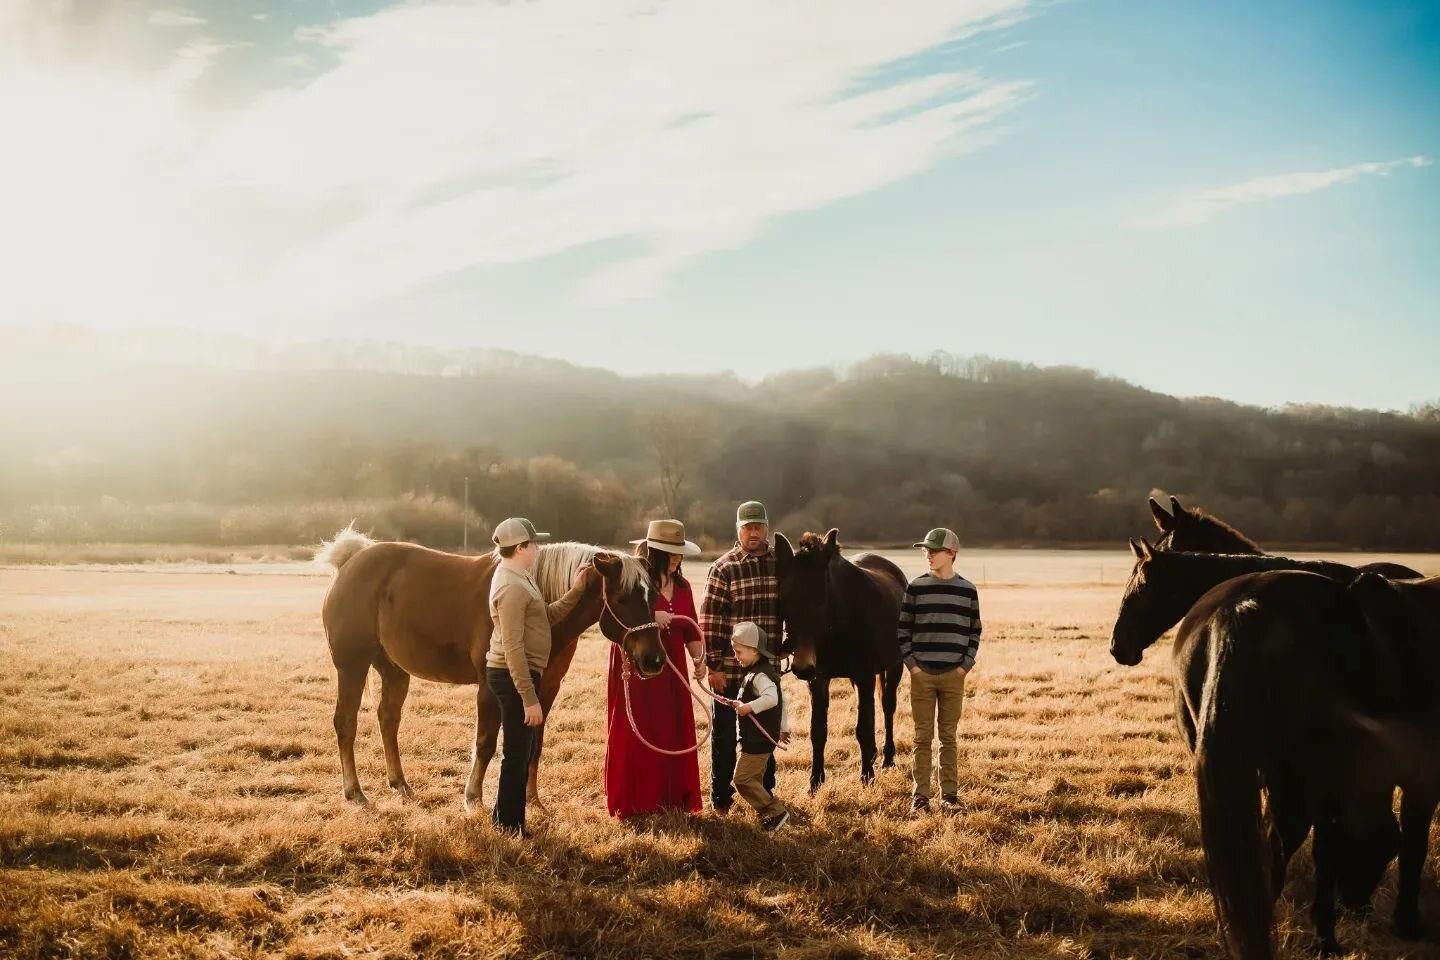 I got to hang out at the Bauer Ranch recently and it was so much fun capturing them in their element! 

The horses loved me, the boys were quite indifferent, and the baby longhorns (😍) didn't enjoy my presence at all. 😆

What a gorgeous piece of Ea